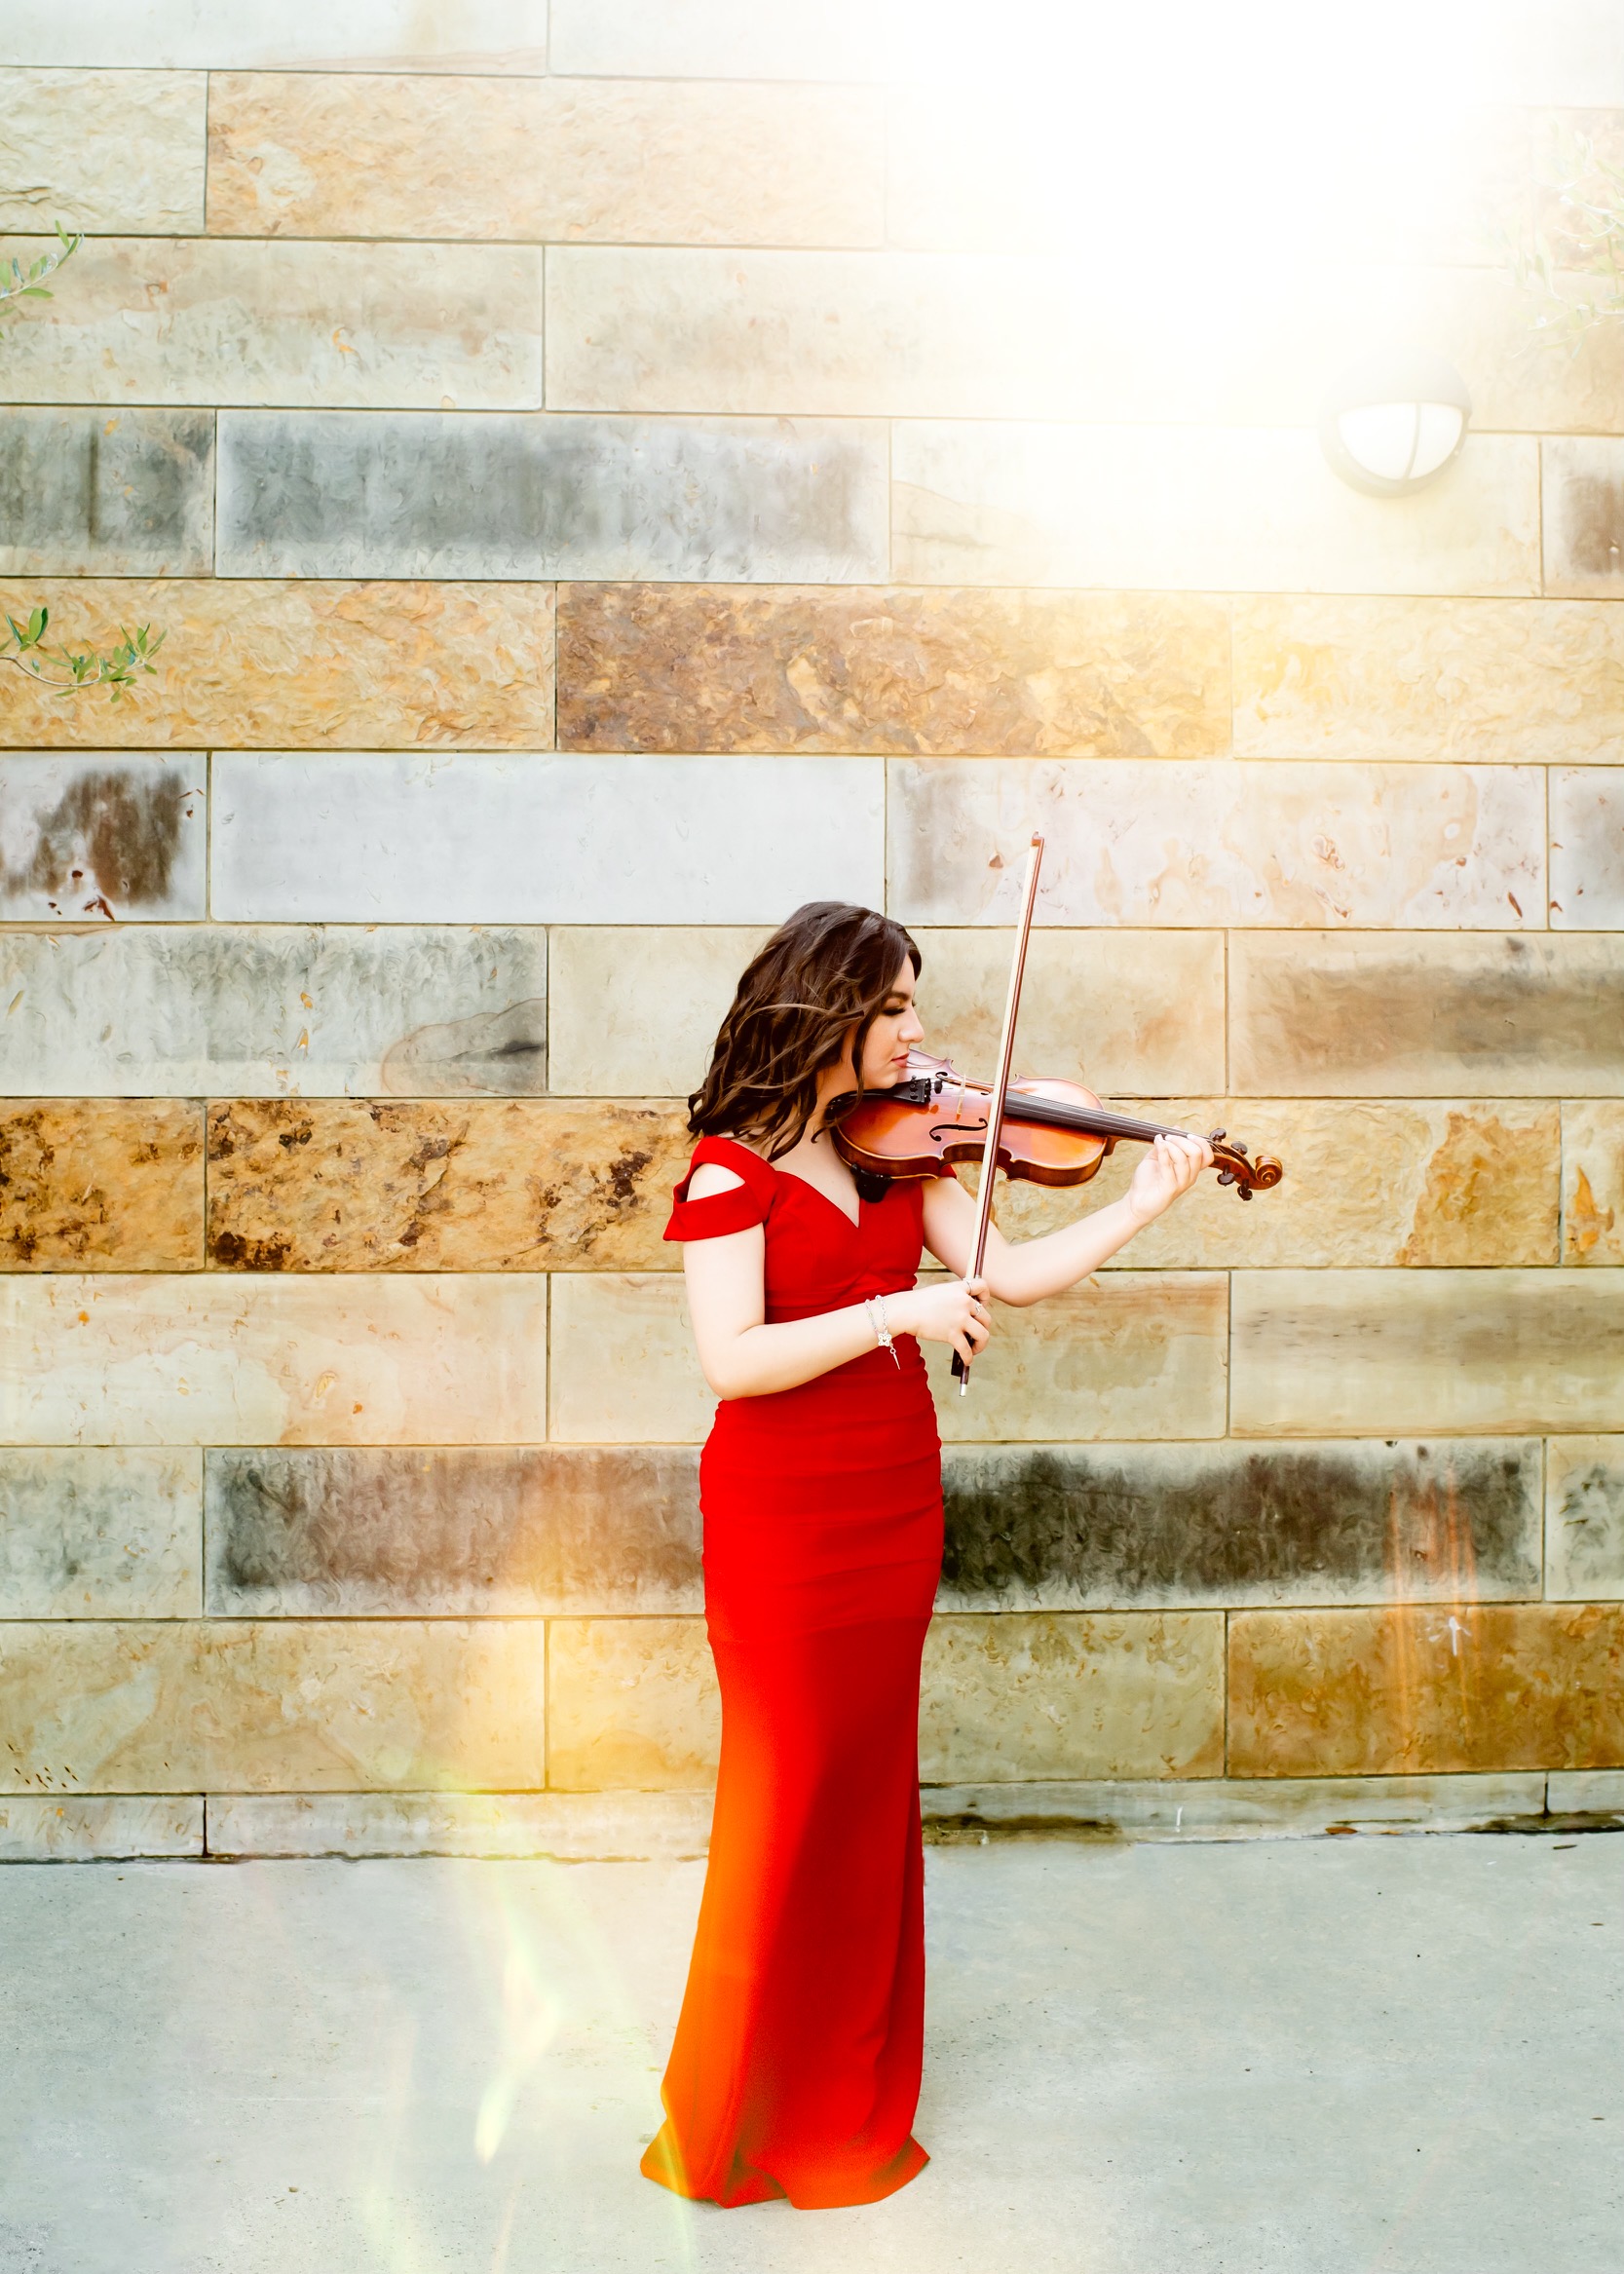 Girl in red dress playing violin